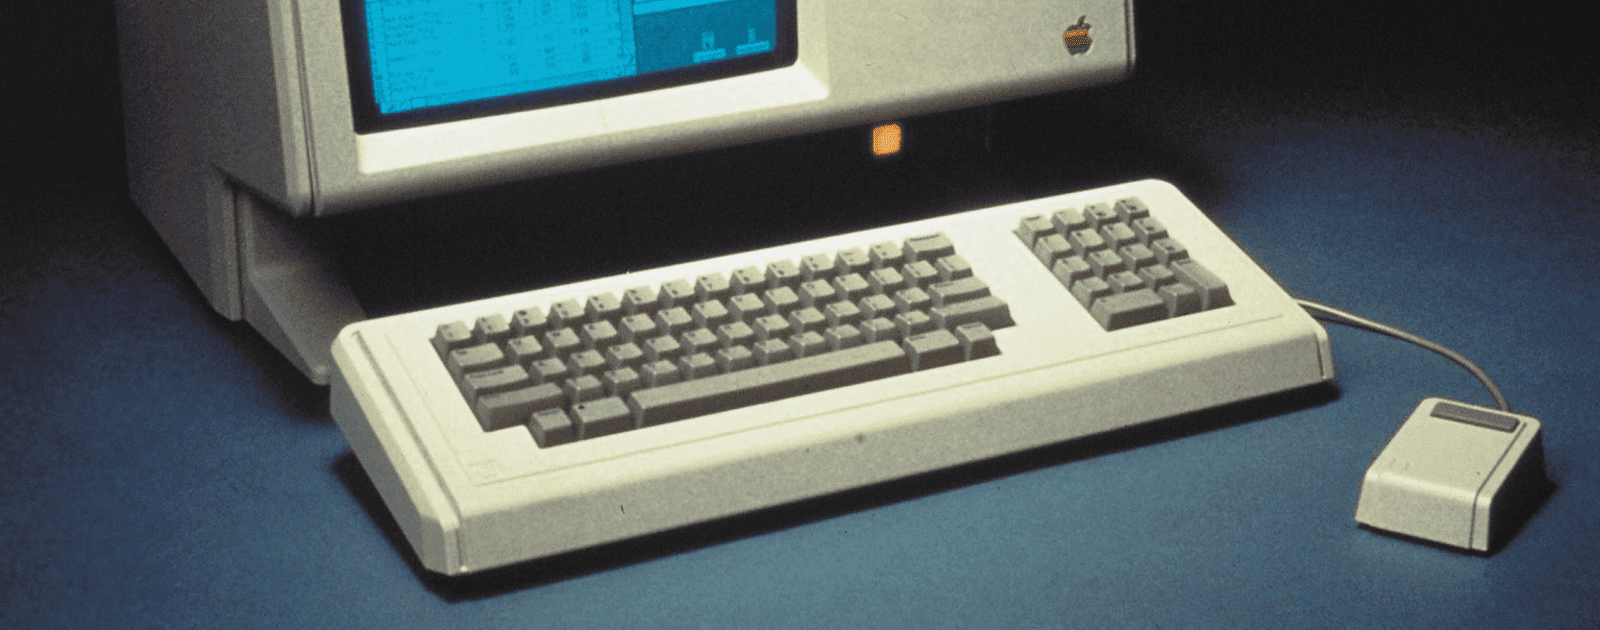 Apple Lisa OS Will Be Publicly Released in 2018